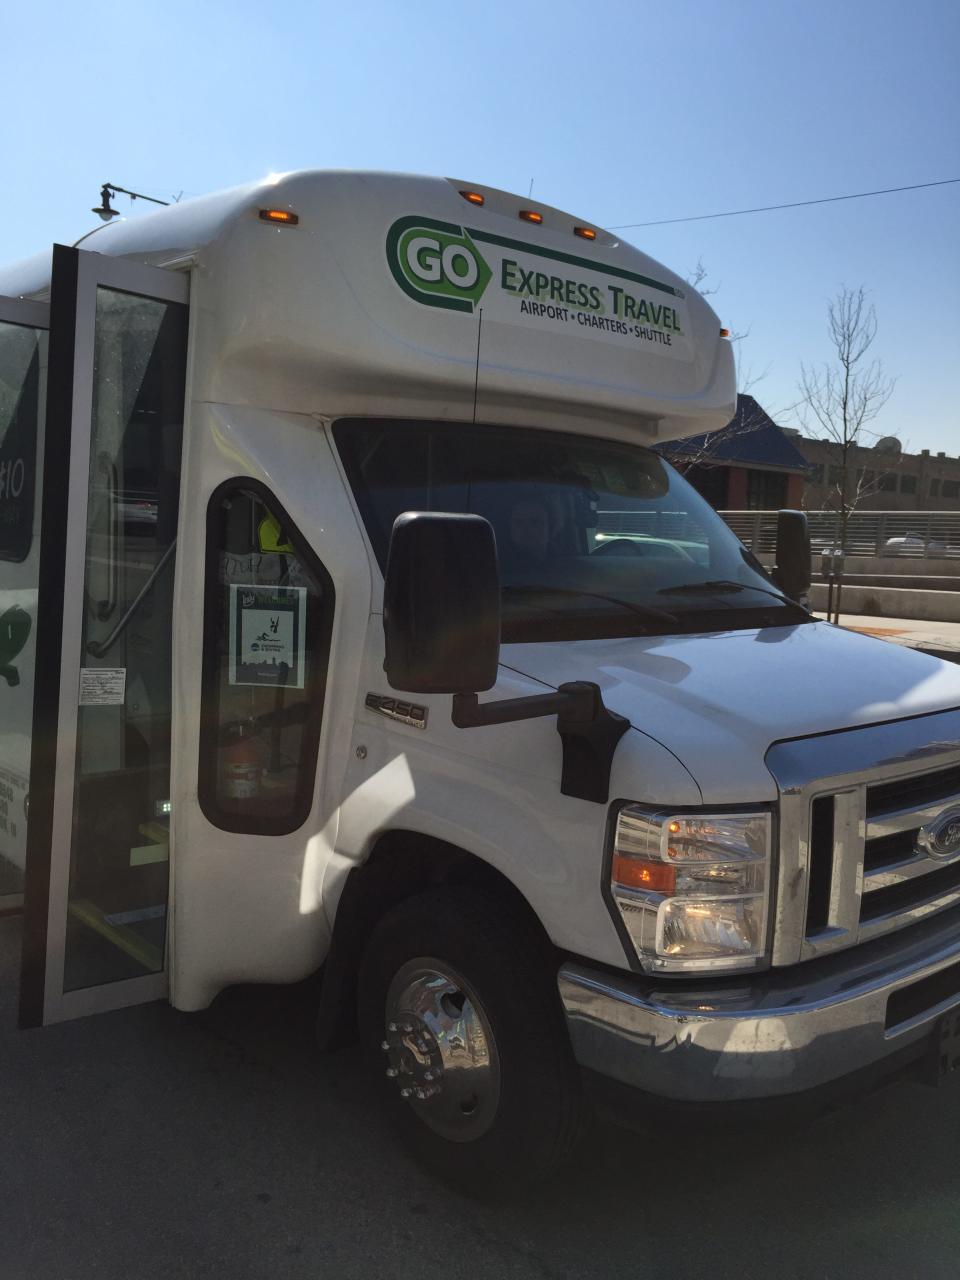 GoExpress has several stops in Bloomington and takes passengers to the Indianapolis International Airport.